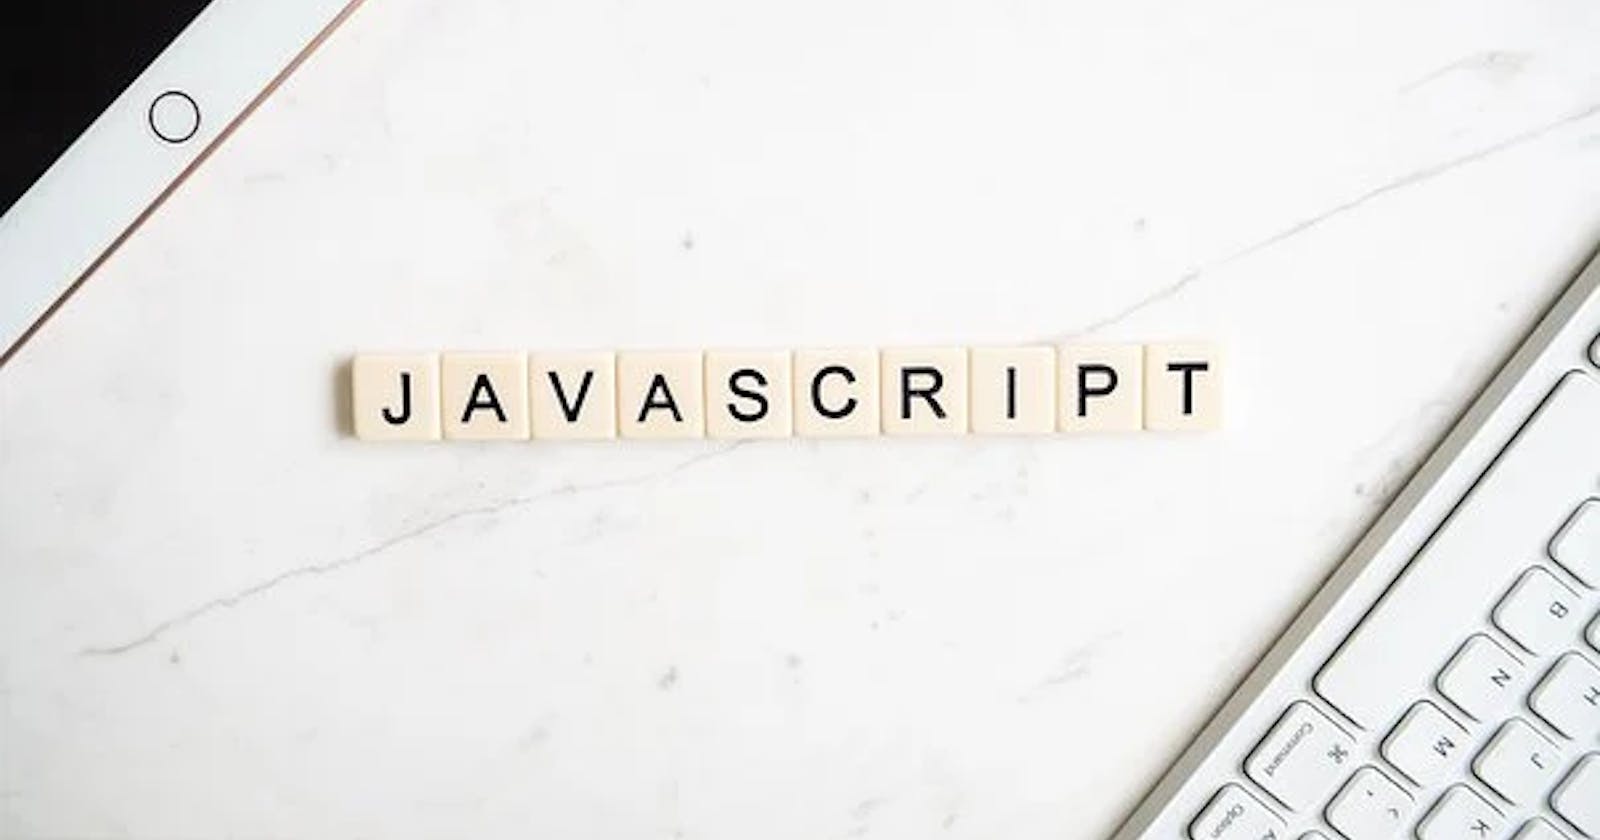 Introduction to Functions in JavaScript